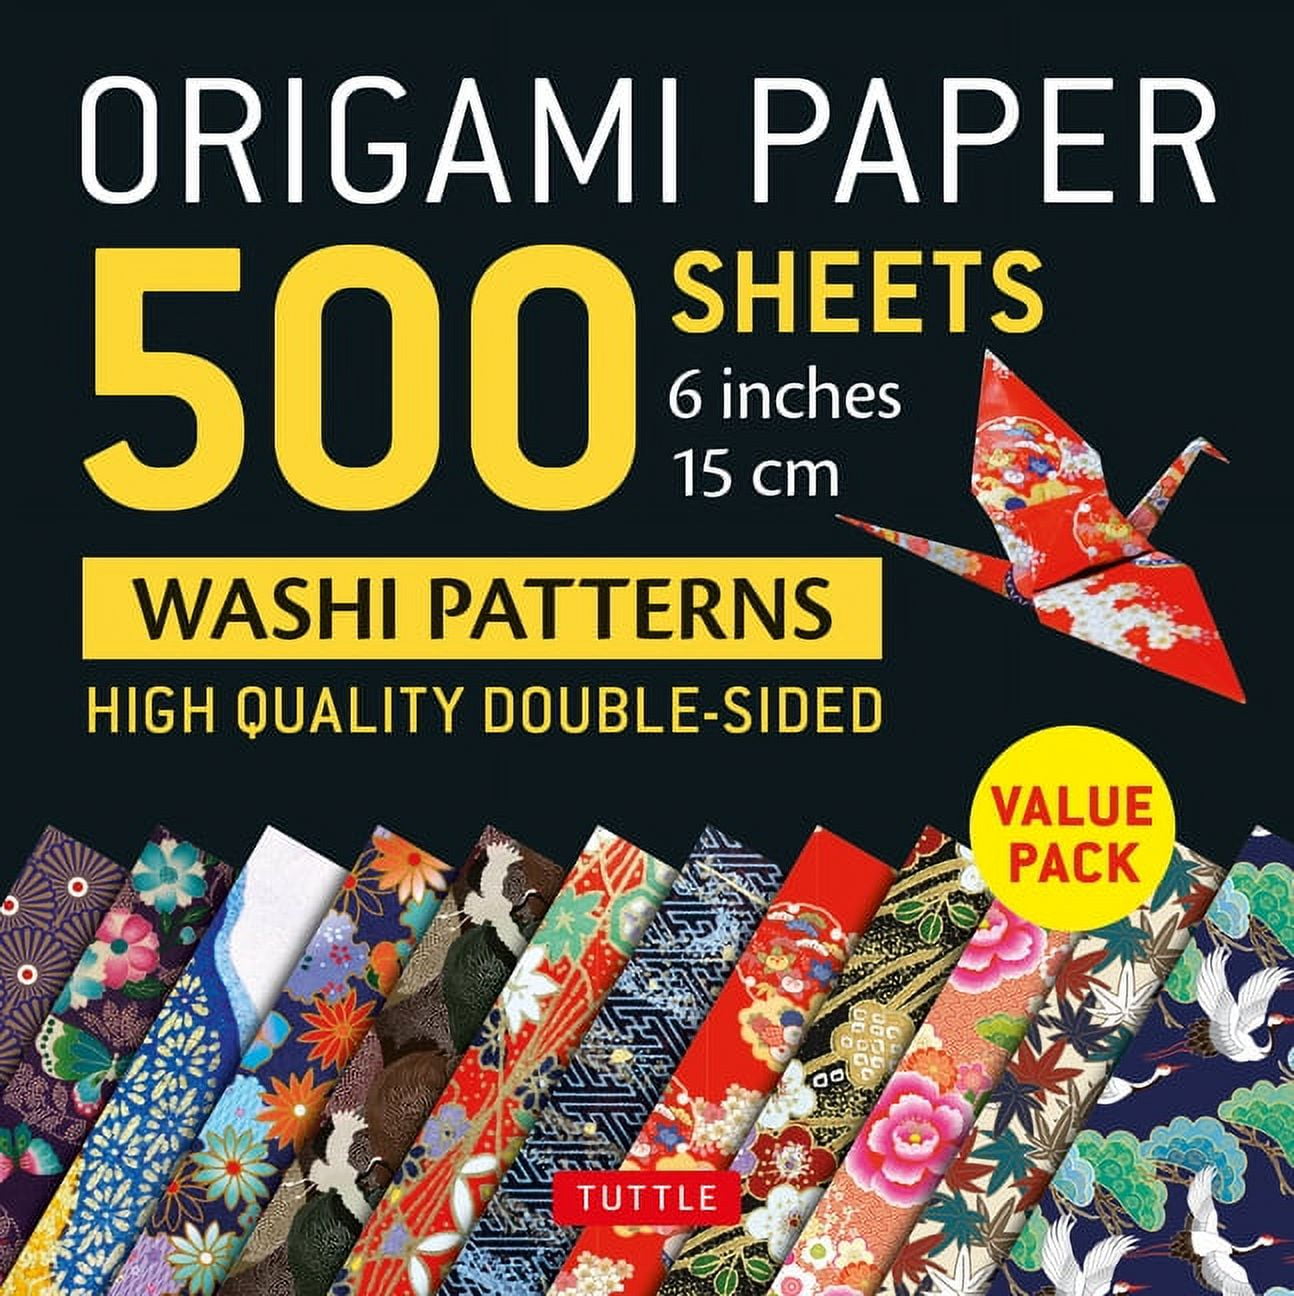 Origami Paper 200 Sheet Japanese Washi Patterns 6 3/4 17 CM: Double Sided  Origami Sheets with 12 Different Patterns (Instructions for 6 Projects  Inclu (Other)